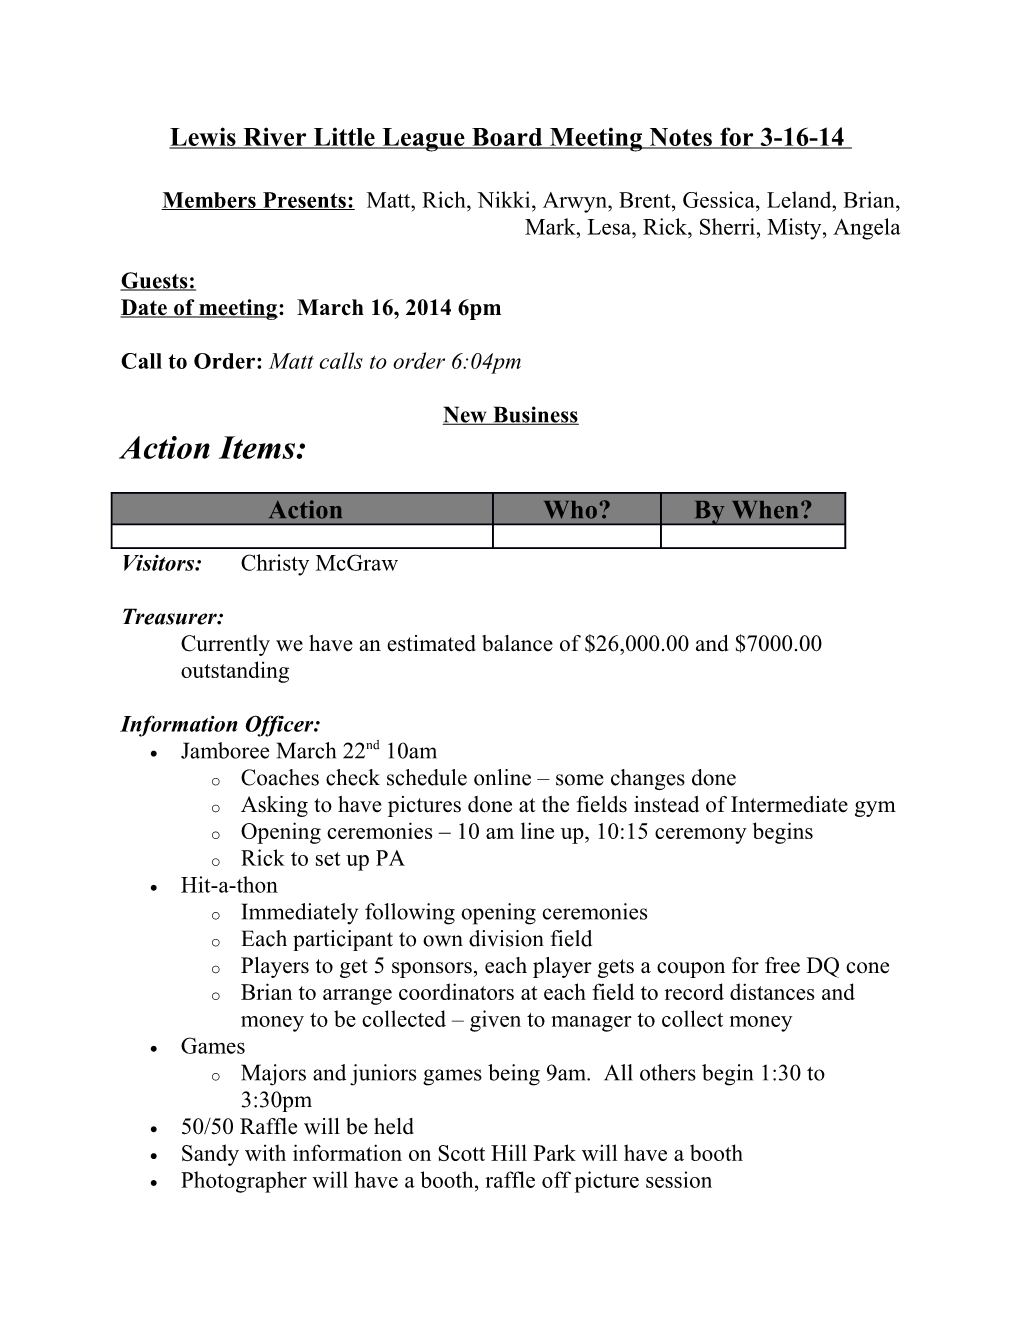 Lewis River Little League Board Meeting Notes for 3-16-14